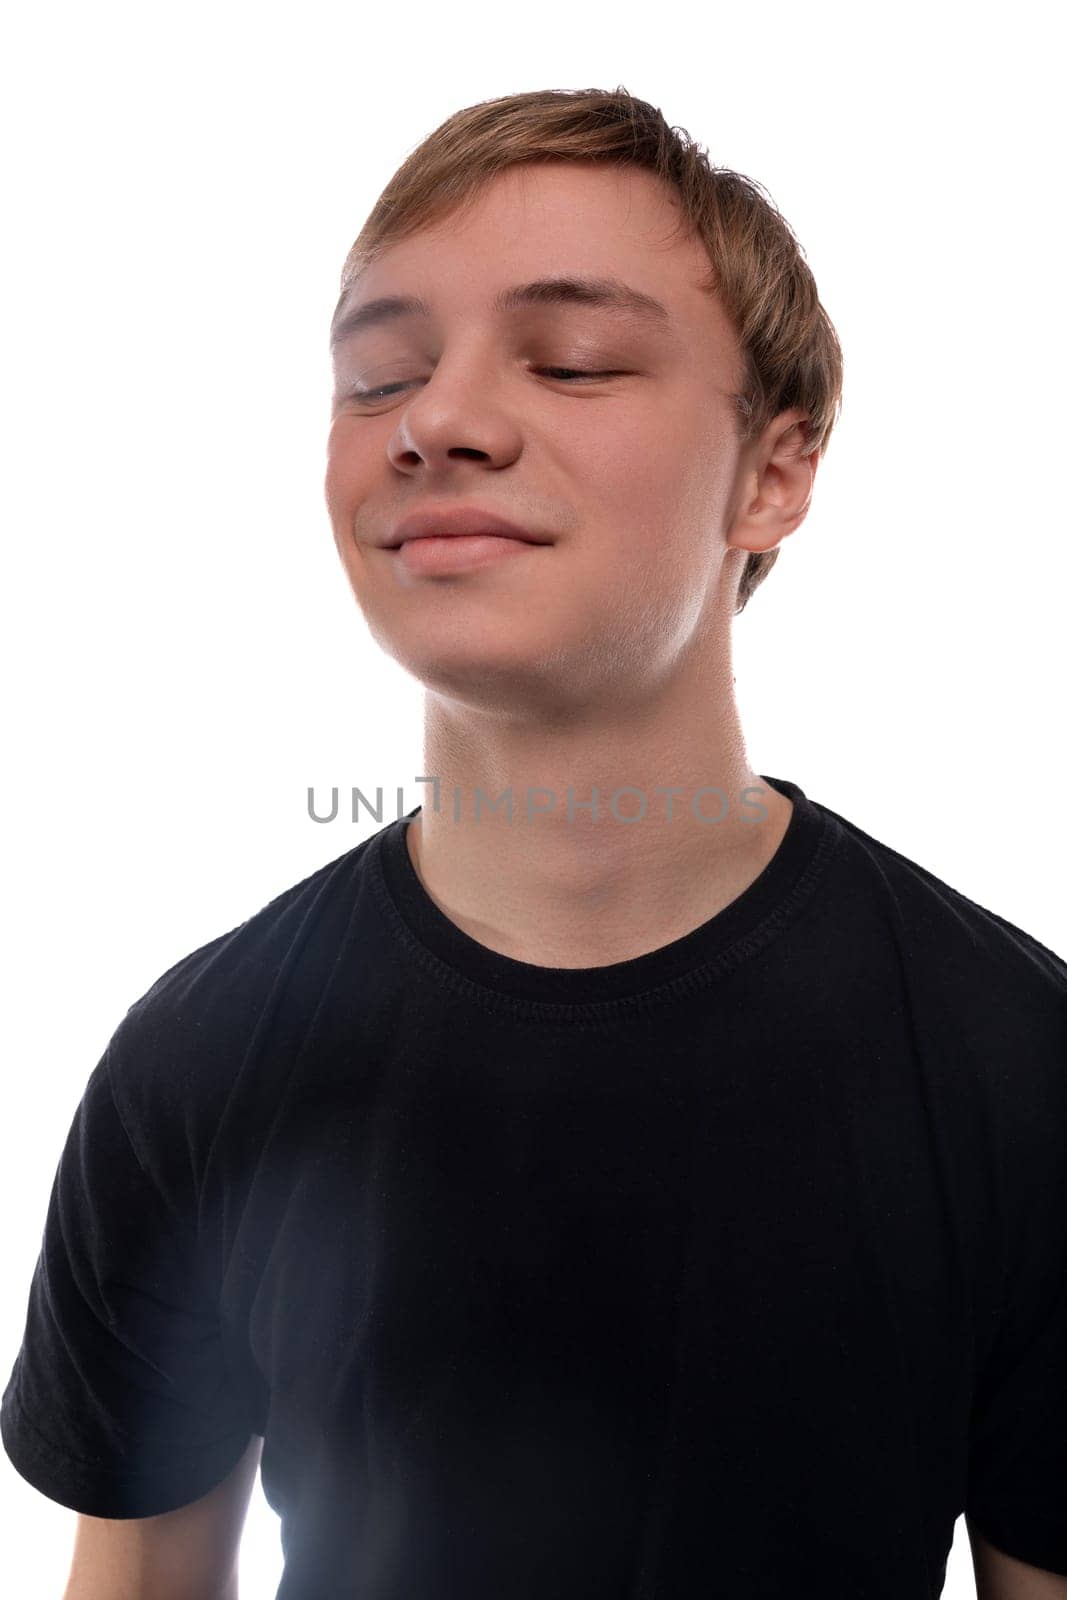 Cute fair-haired teenager guy on a white background, close-up portrait.